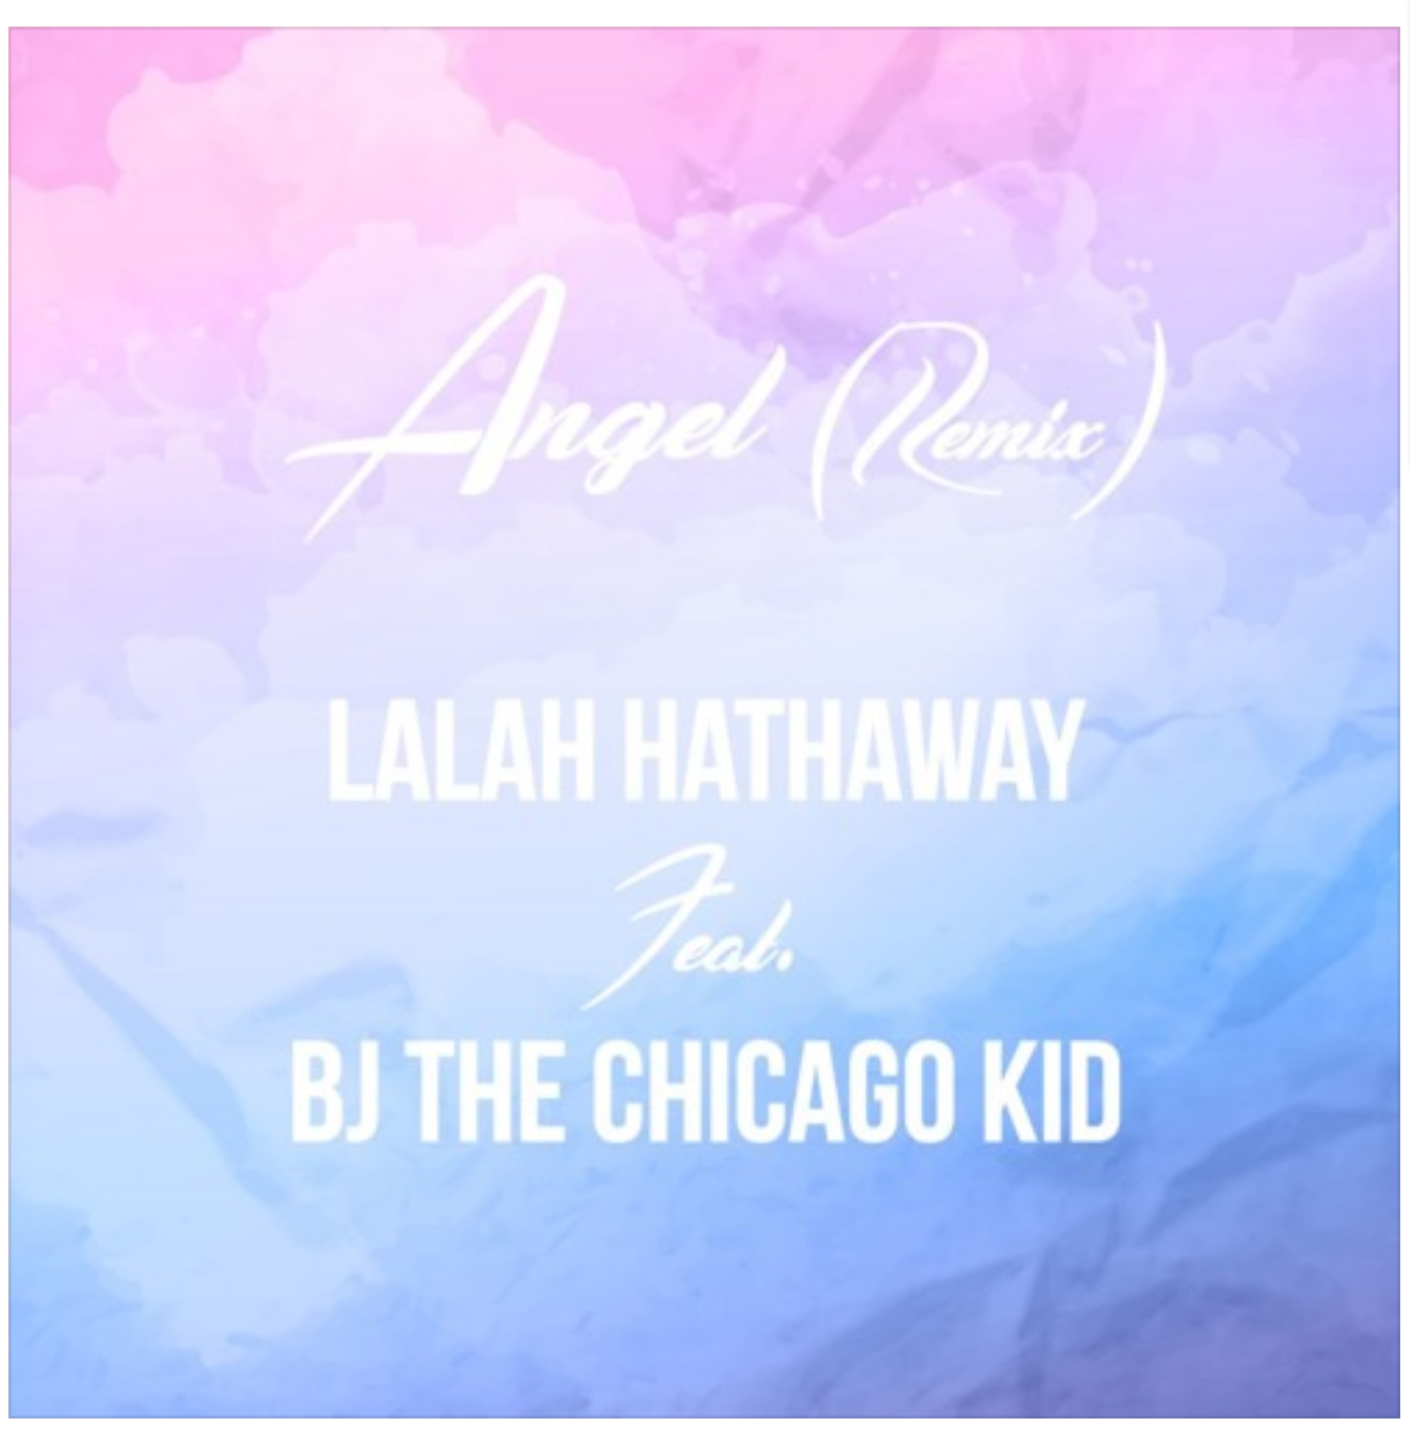 New Music: Lalah Hathaway - Angel (featuring BJ the Chicago Kid) (Remix)